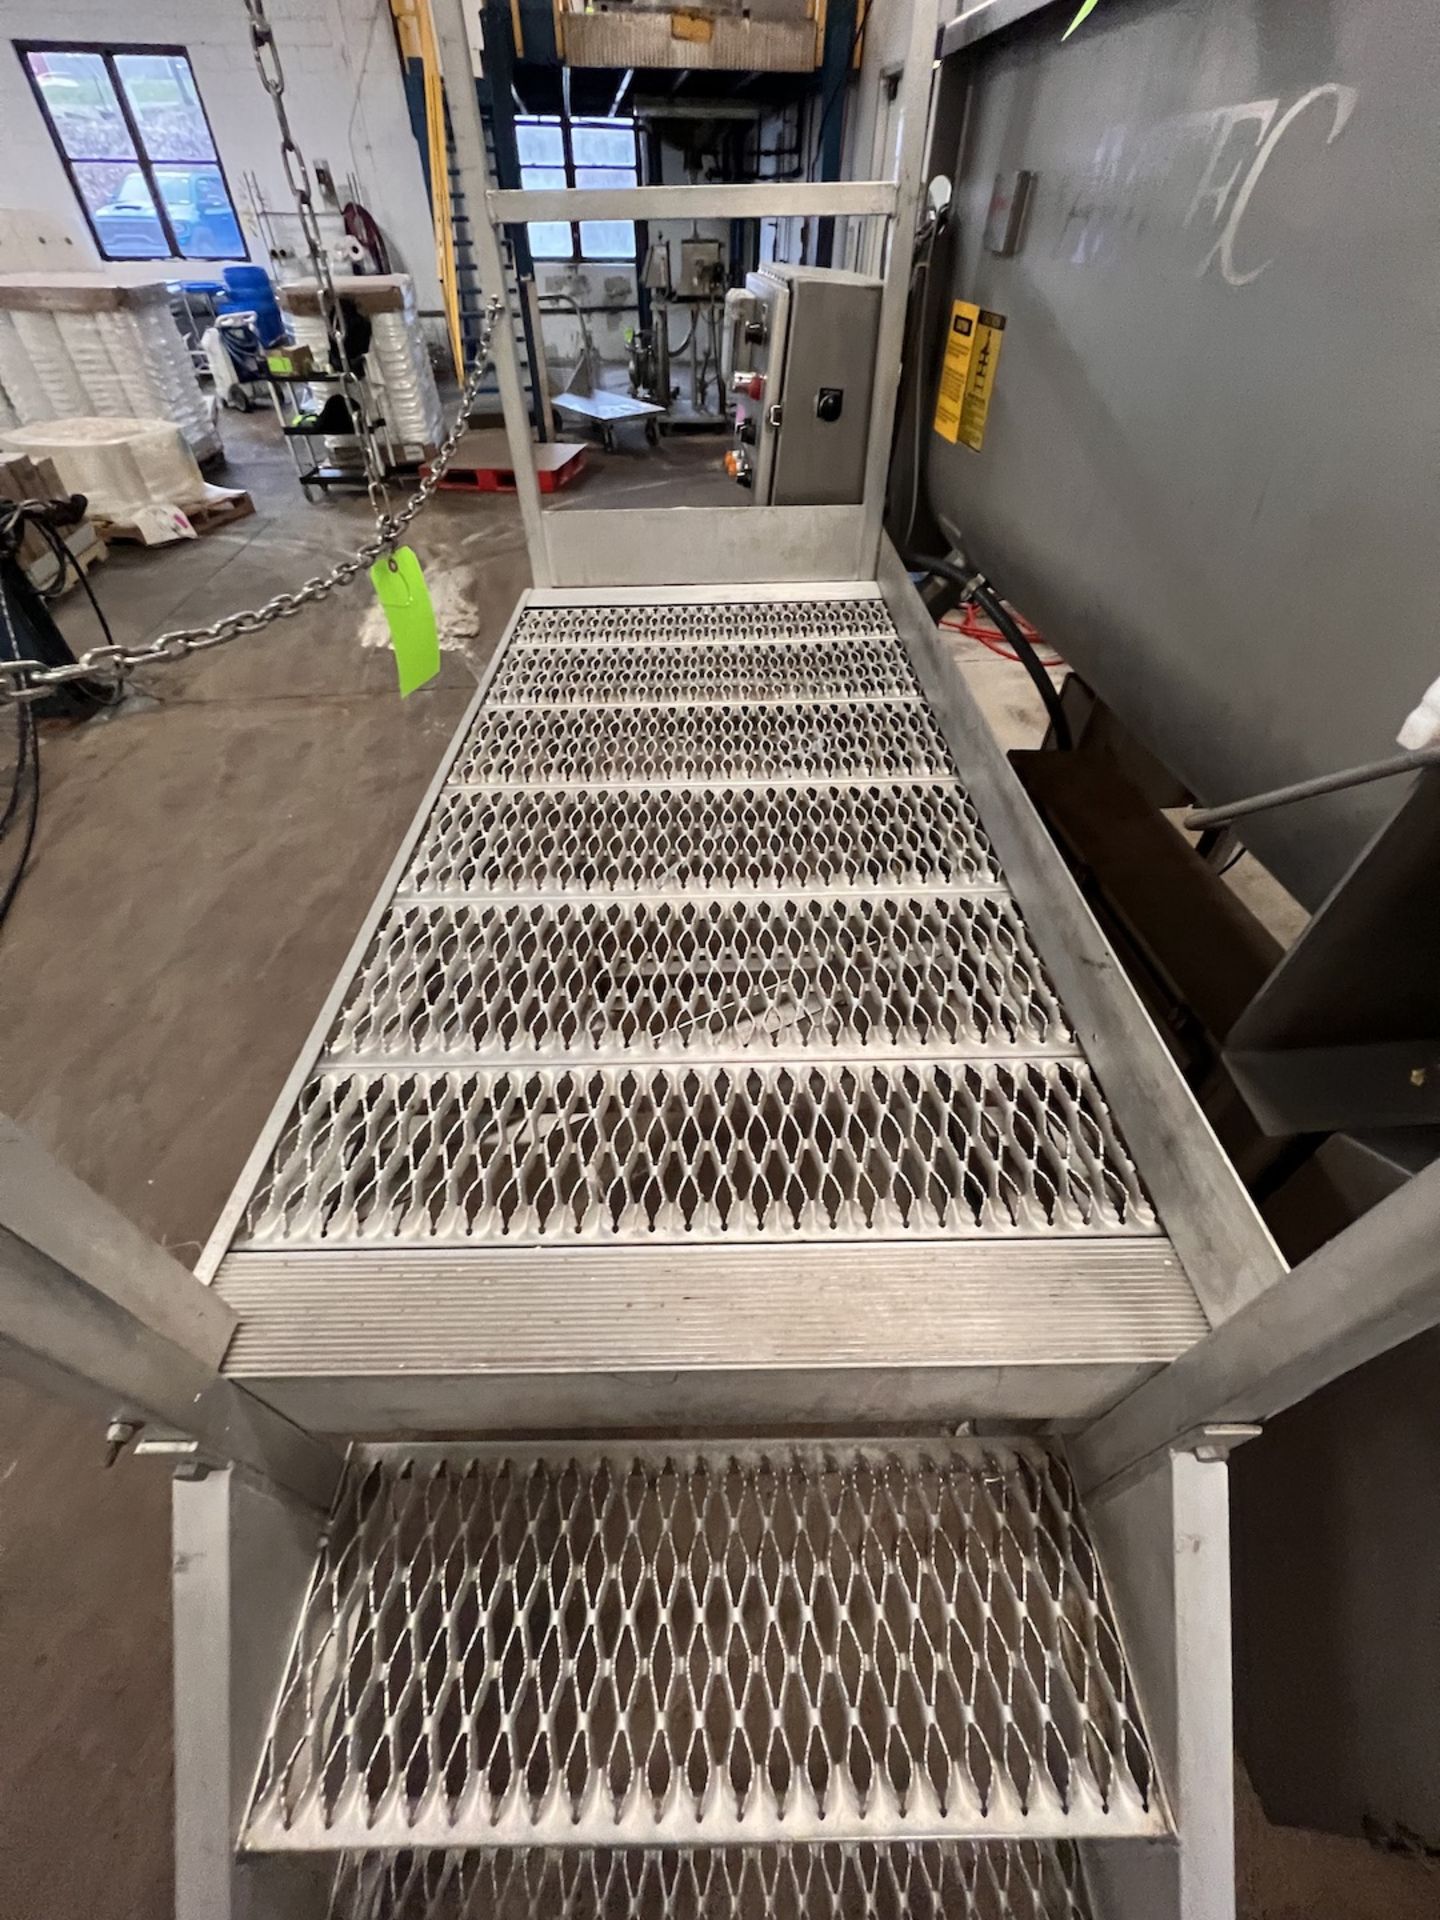 ALUMINUM PLATFORM, APROX. 8 ft. L, WITH HANDRAILS (LOCATED IN CALLERY, PA) - Bild 3 aus 6